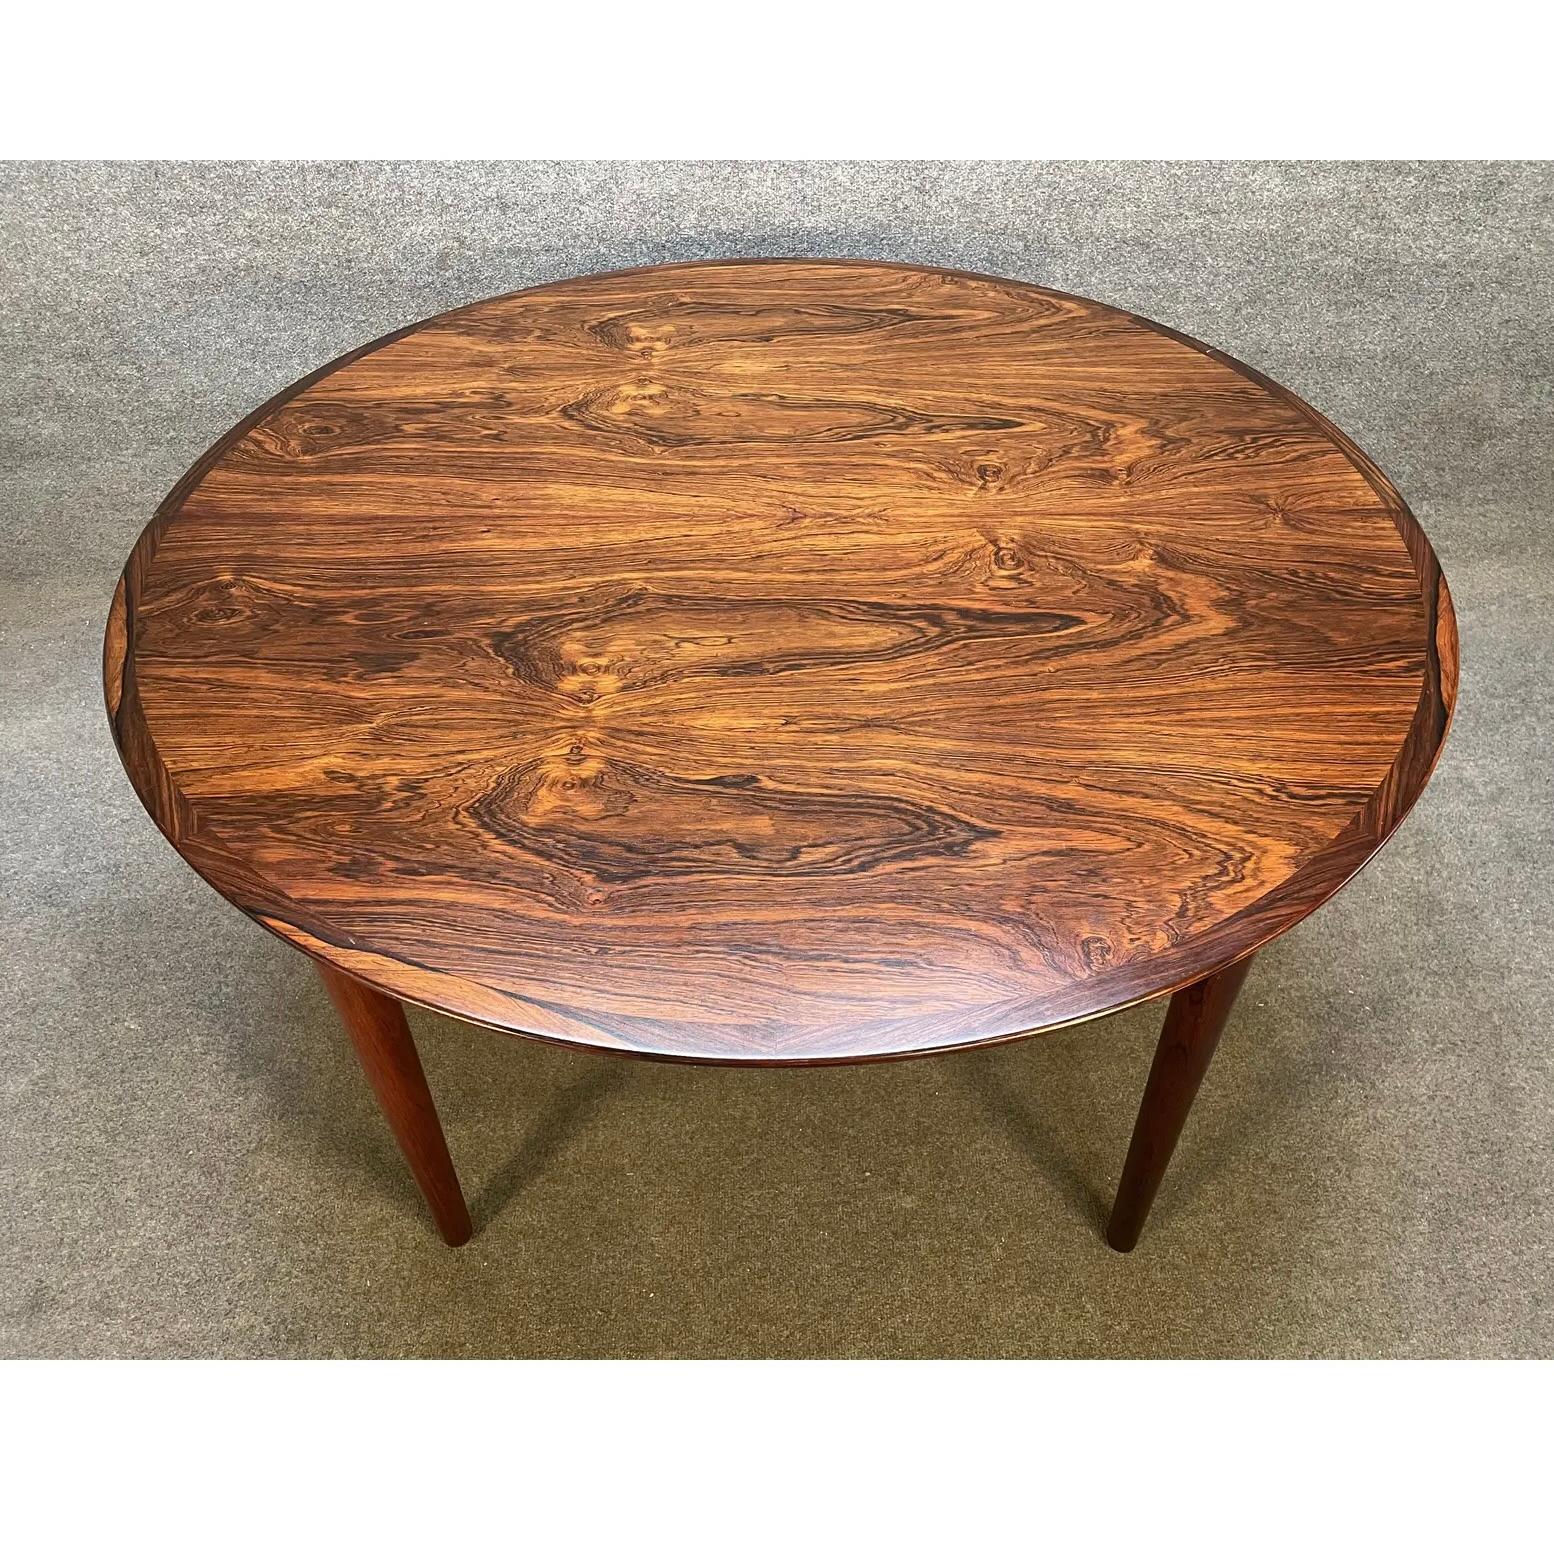 Here is a beautiful 1960's Scandinavian Modern dining table in Brazilian rosewood attributed to famed designer Johannes Andersen.
This table, recently imported from Denmark to California before its refinishing, features. a circular shape, a top